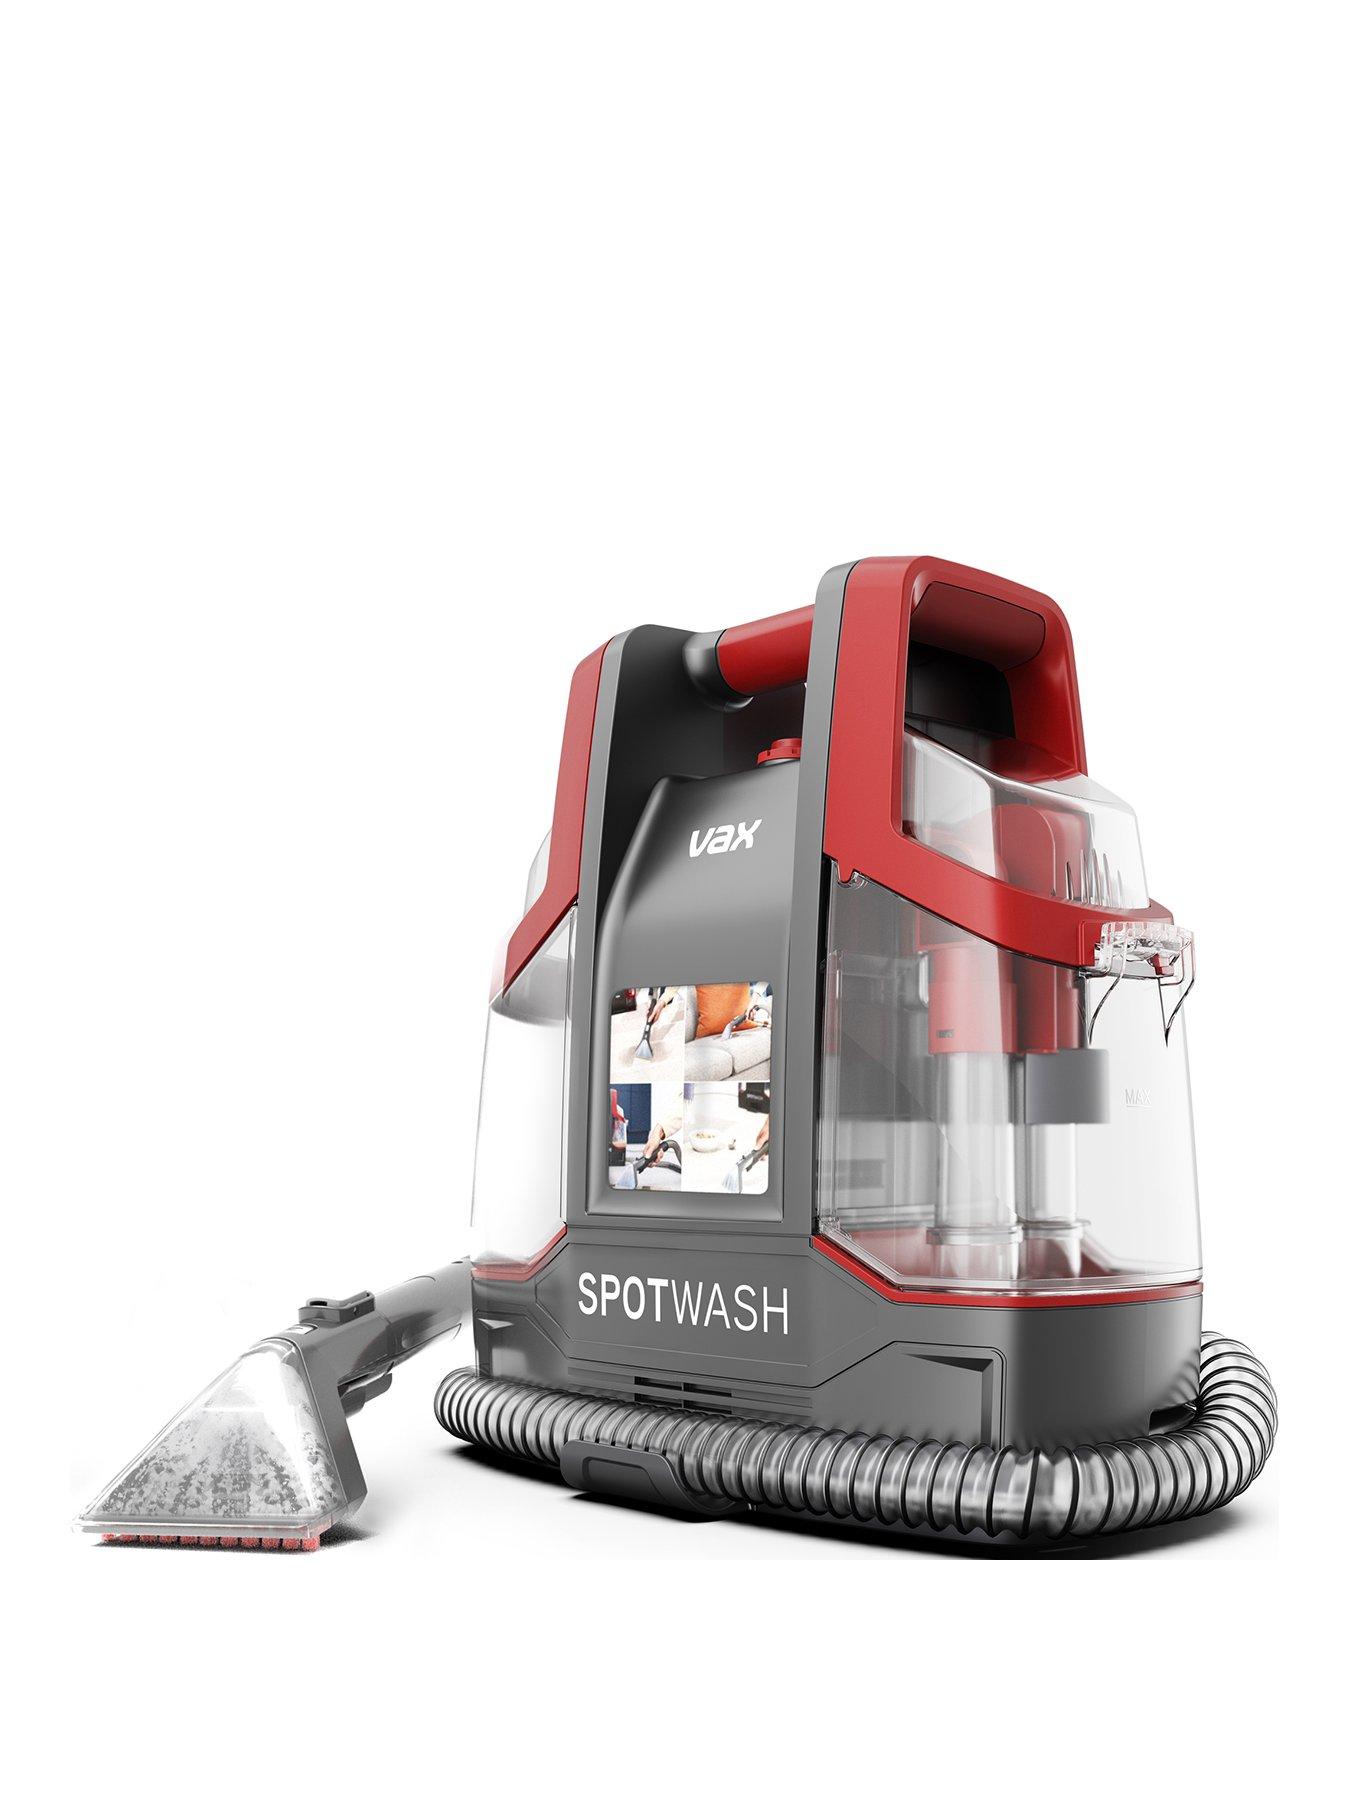 I am obsessed with our Bissell SpotClean ProHeat Pet Portable Carpet C